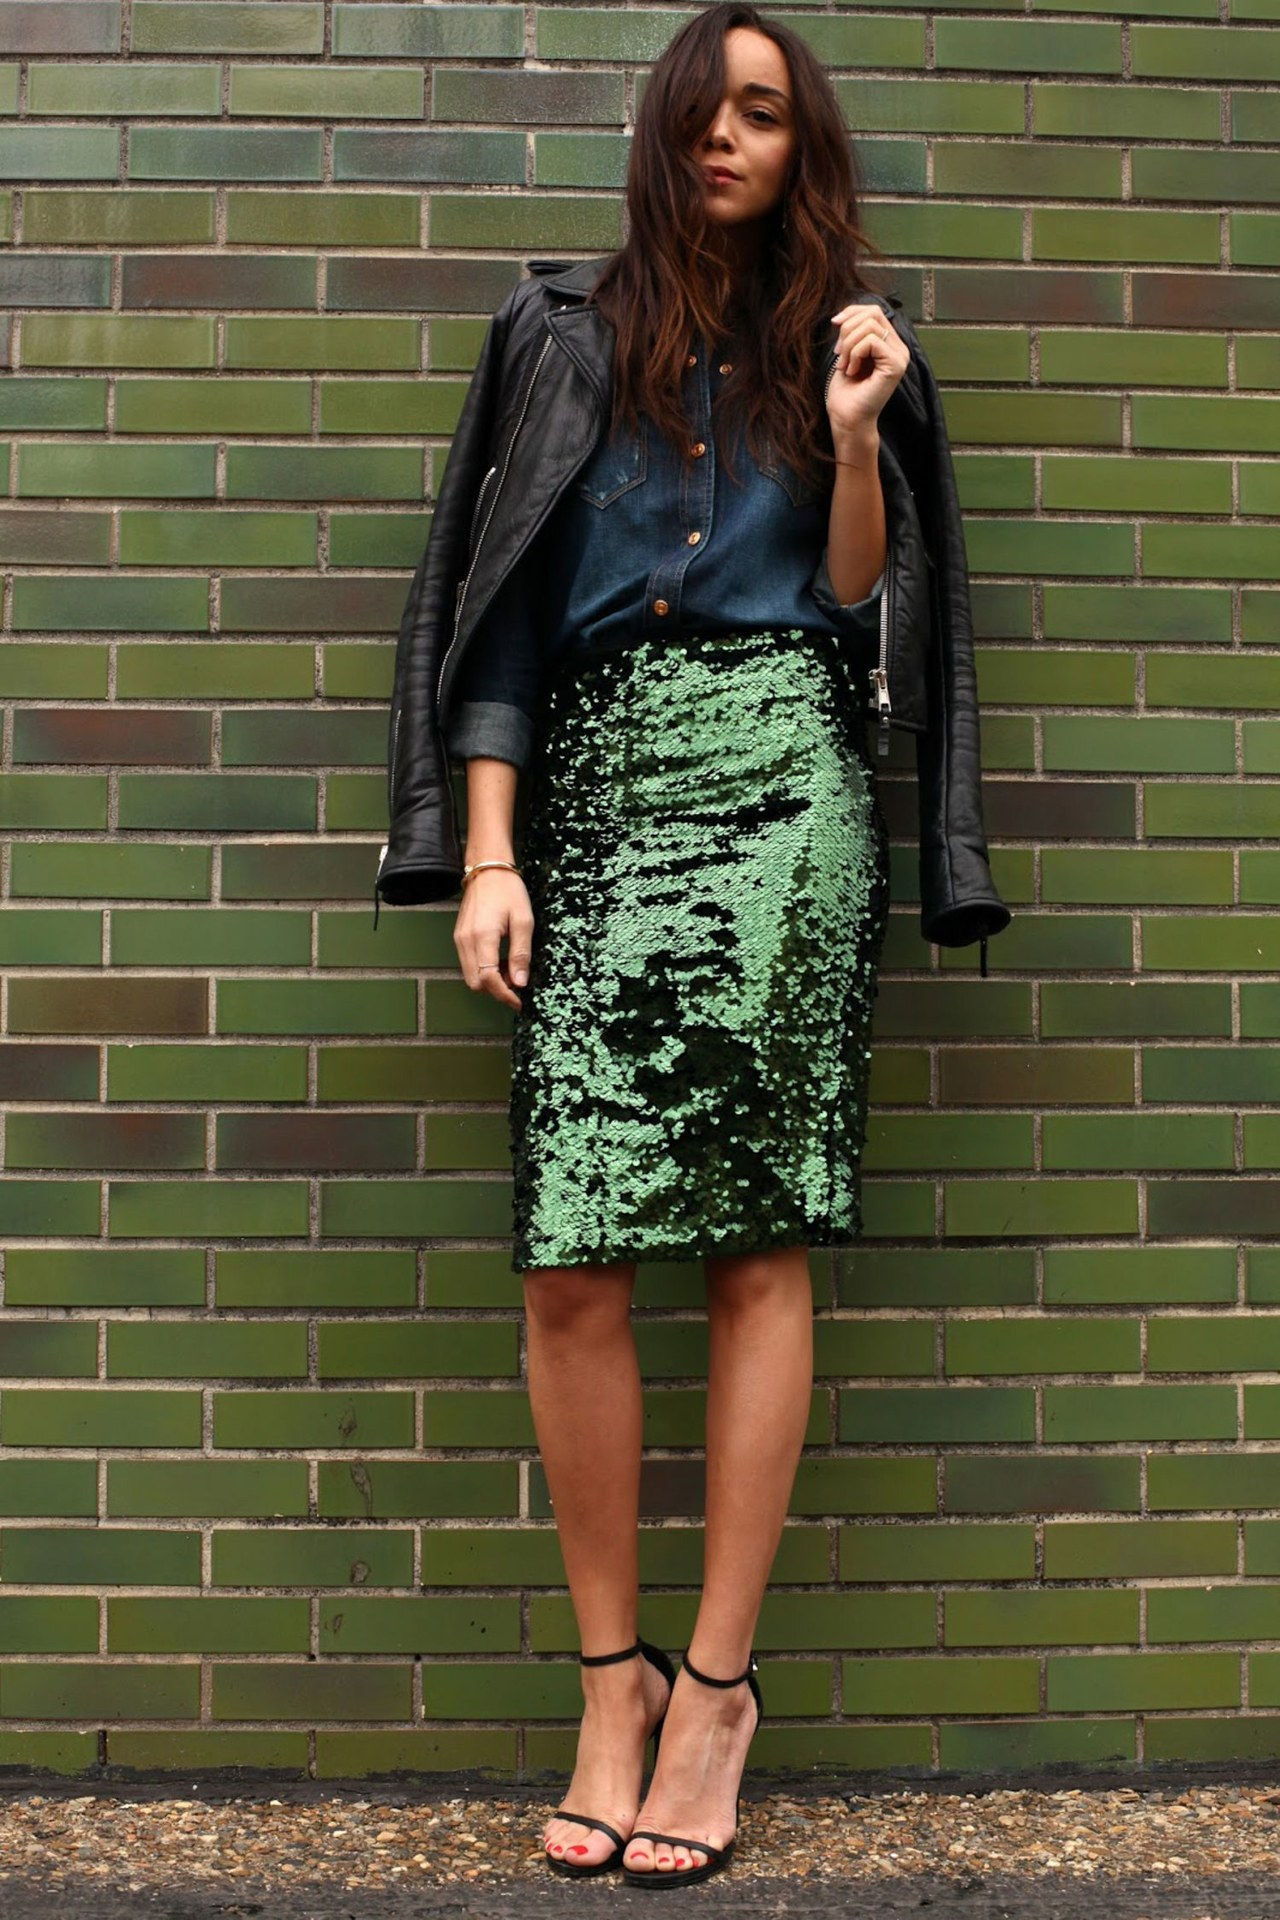 lentejuela skirt outfit ideas ring my bell